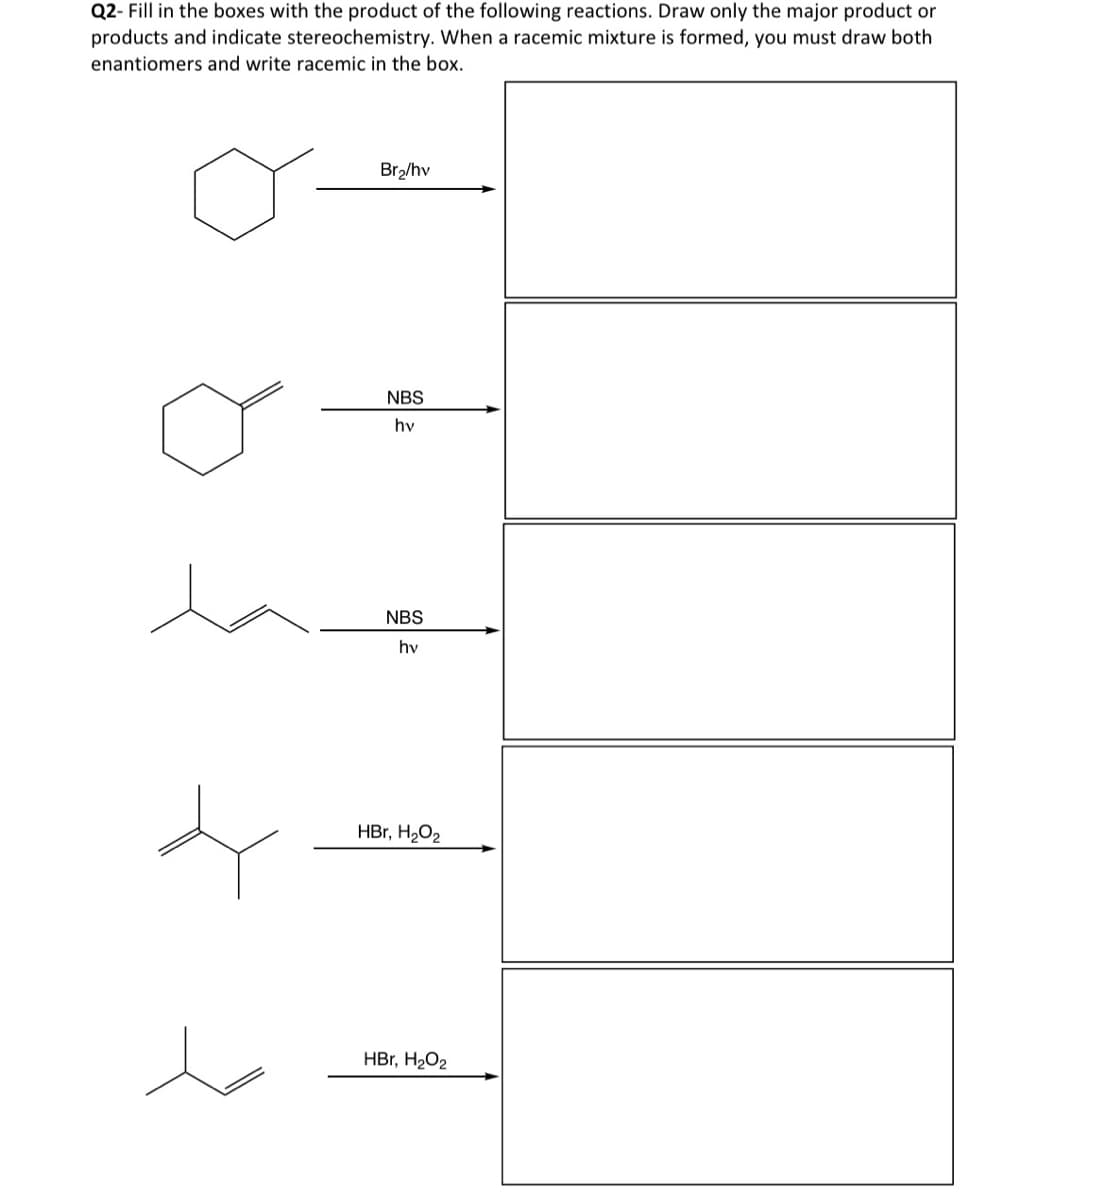 Q2- Fill in the boxes with the product of the following reactions. Draw only the major product or
products and indicate stereochemistry. When a racemic mixture is formed, you must draw both
enantiomers and write racemic in the box.
Br₂/hv
NBS
hv
NBS
hv
HBr, H₂O2
HBr, H₂O2